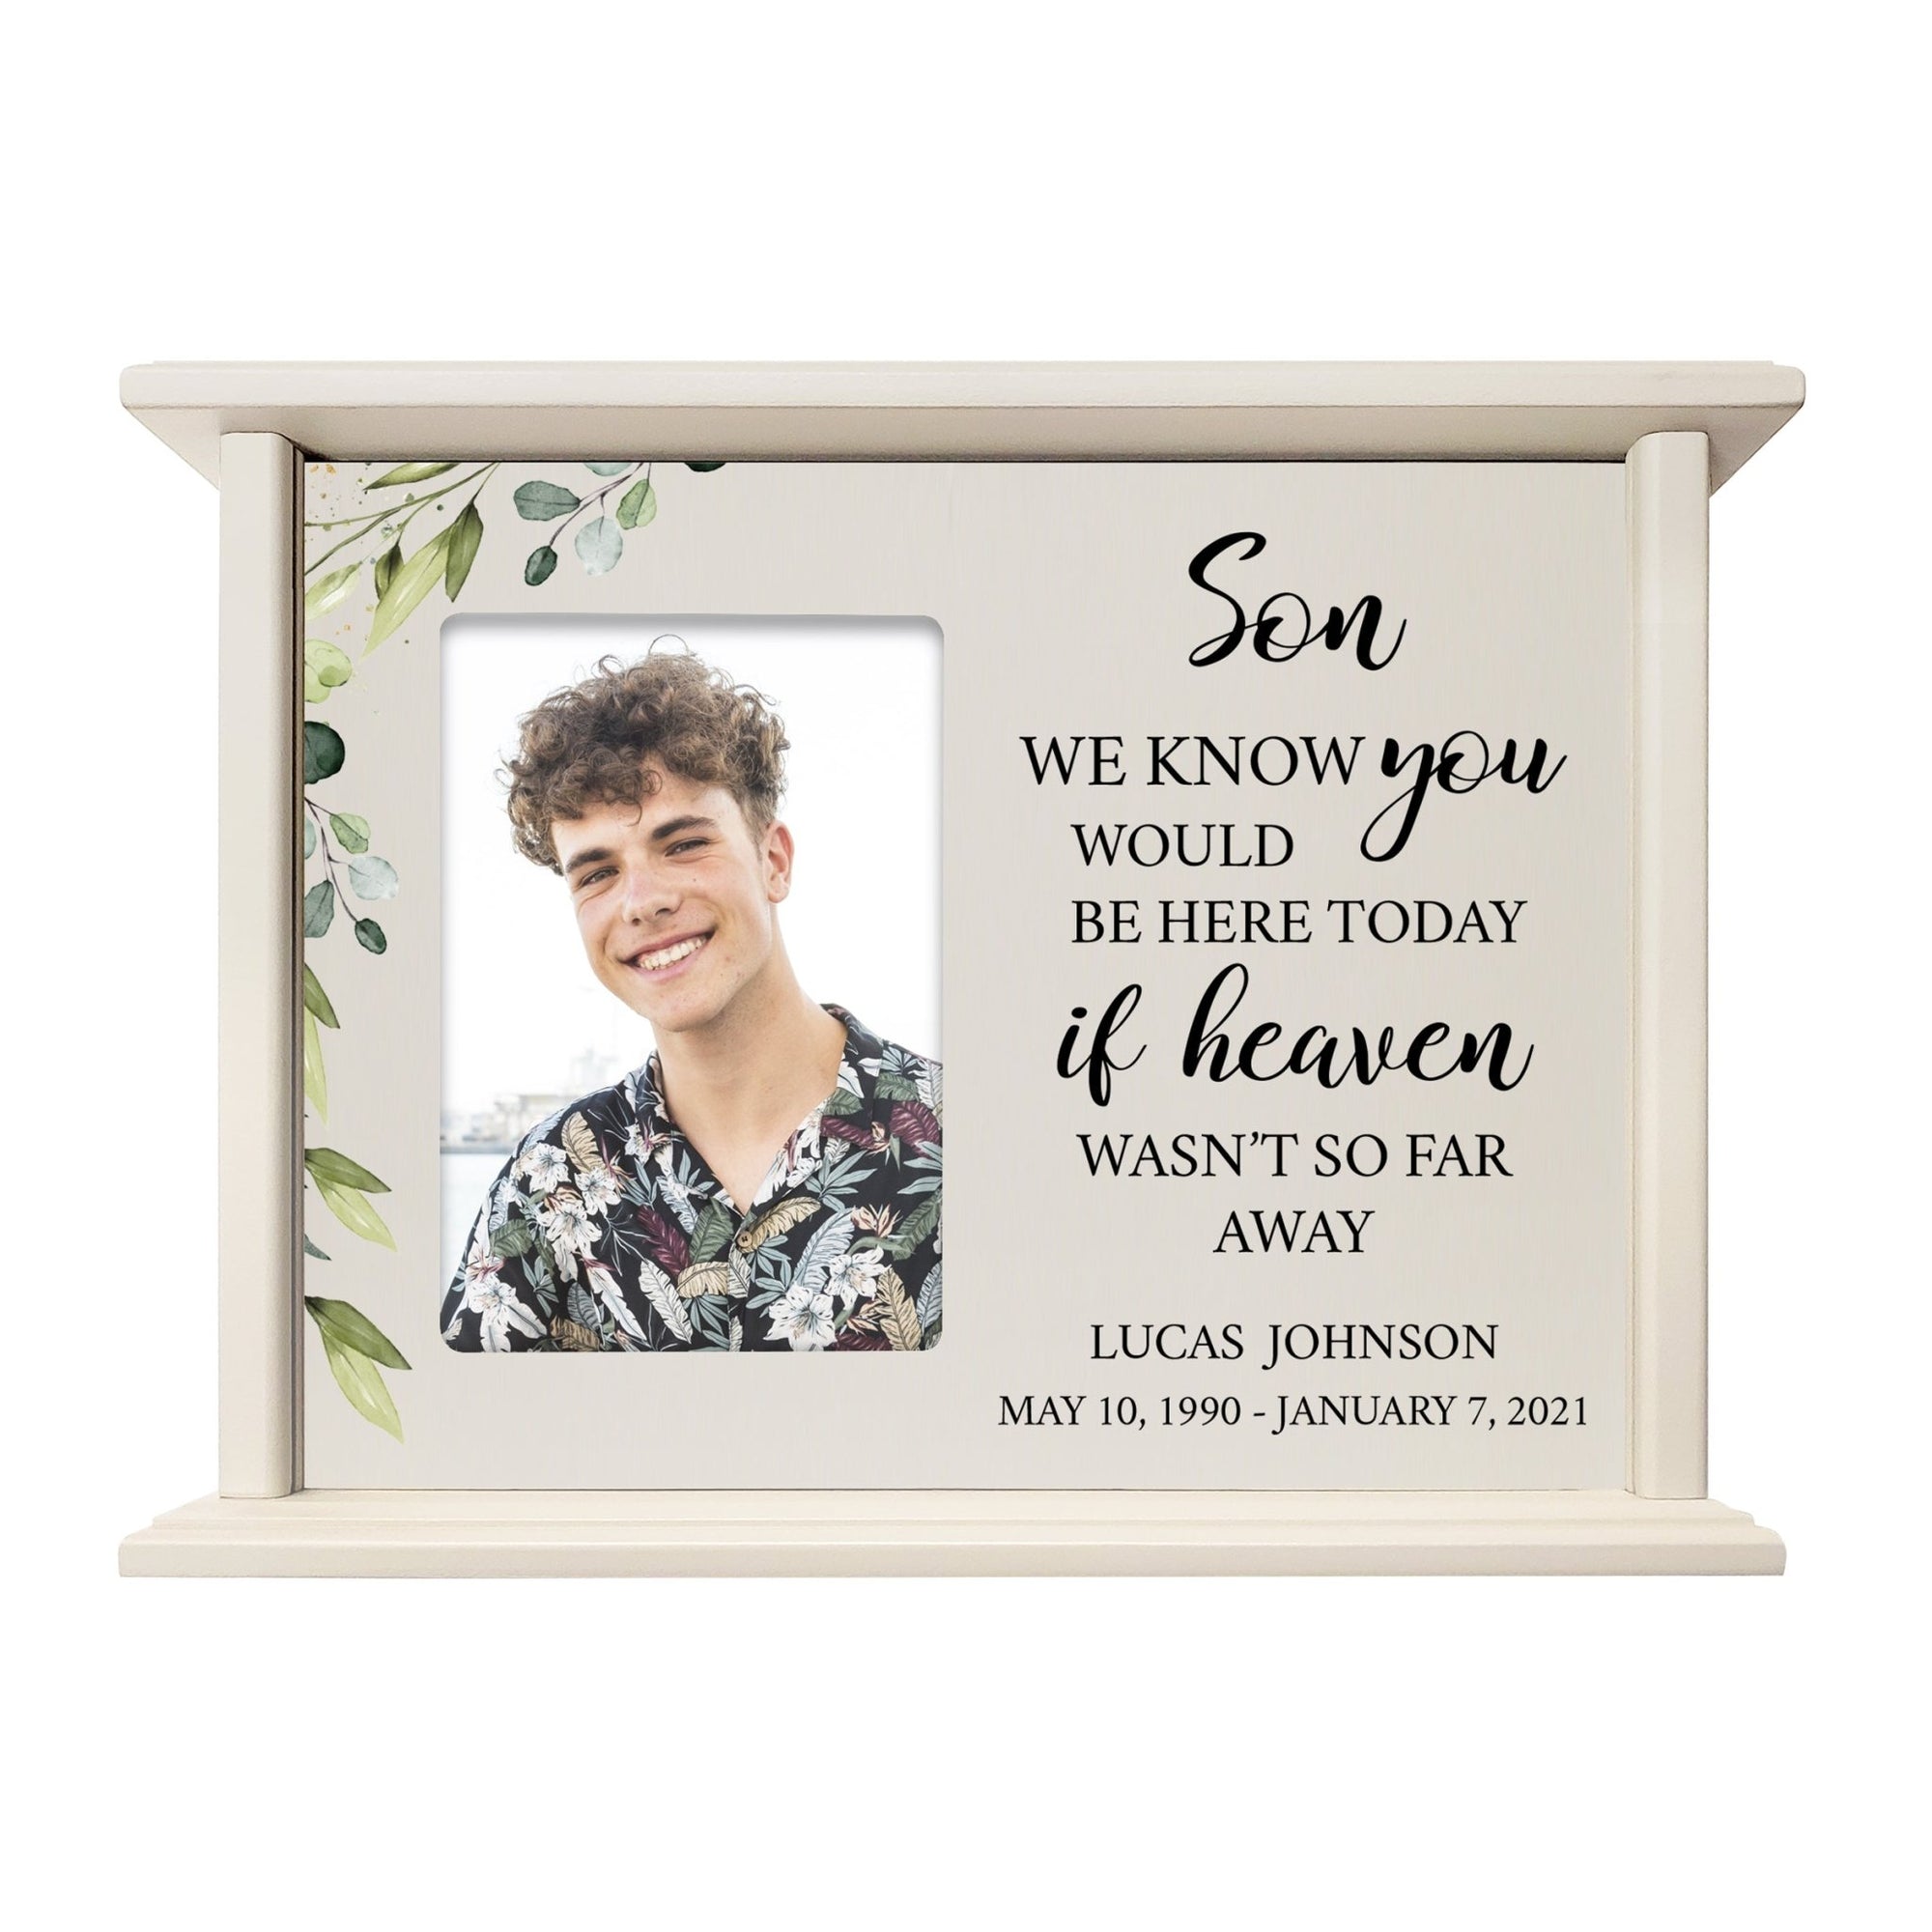 Personalized Memorial Cherry Wood 12 x 4.5 x 9 Cremation Urn Box with Picture Frame holds 200 cu in of Human Ashes and 4x6 Photo - We Know You Would (Ivory) - LifeSong Milestones